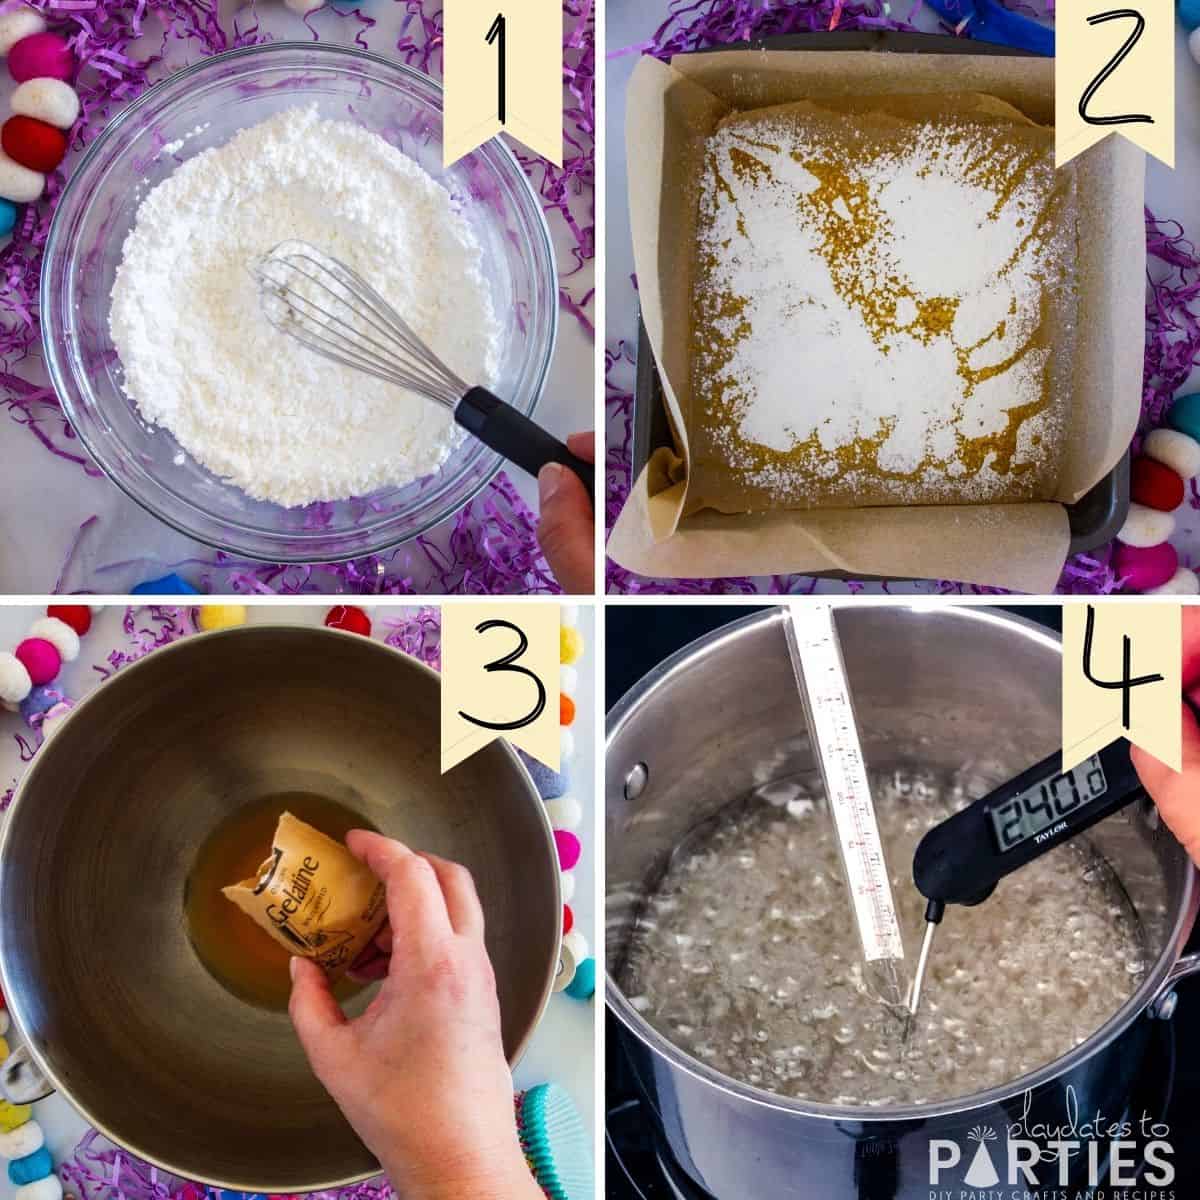 steps 1 through 4: combining powdered sugar and corn starch, preparing the pan, mixing wet ingredients with gelatin, boiling sugar water and corn syrup